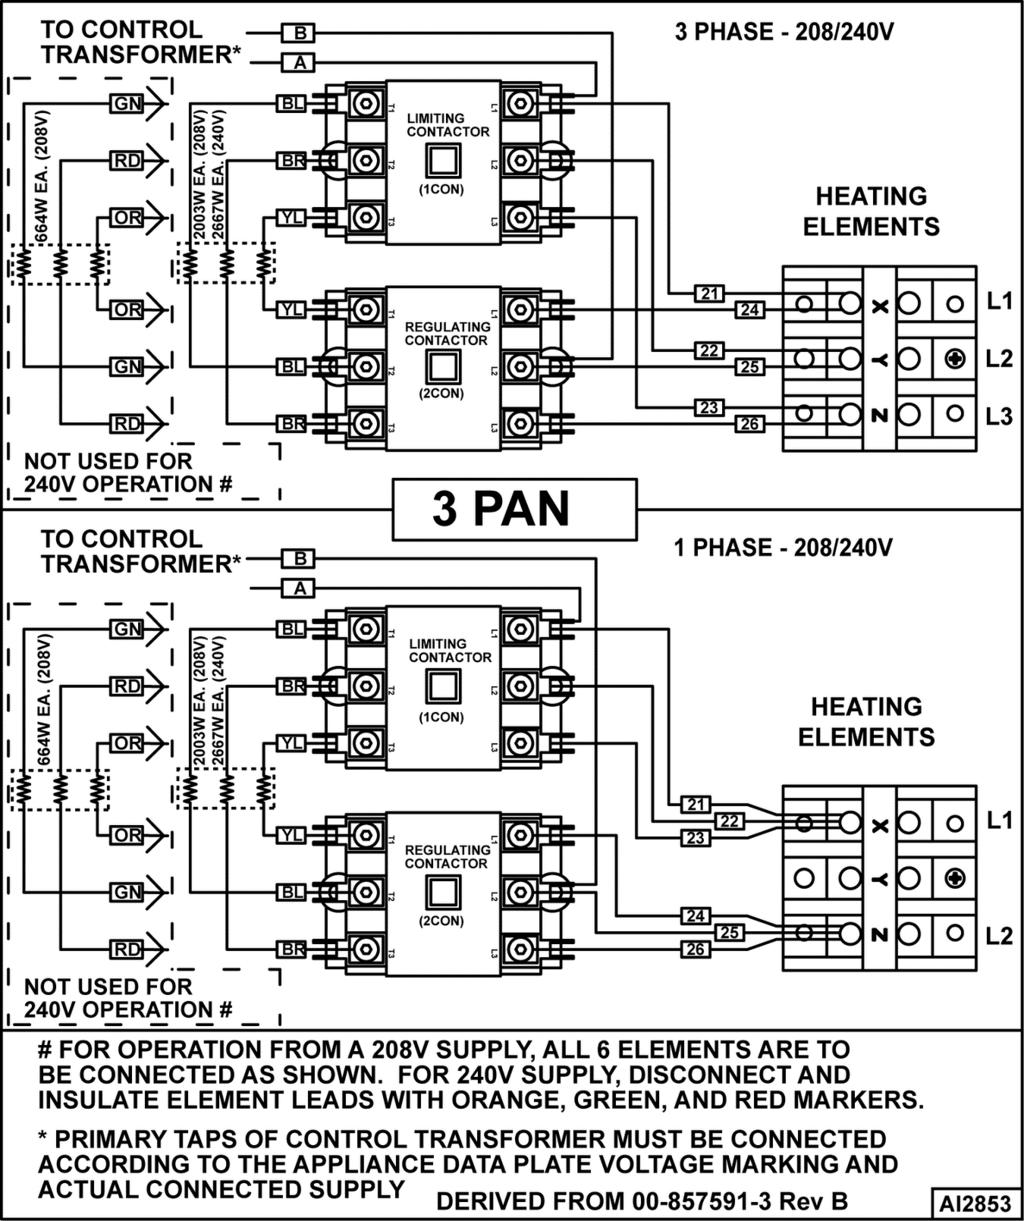 C24EO SERIES ELECTRIC COUNTERTOP STEAMERS - ELECTRICAL OPERATION WIRING DIAGRAMS - HEATING